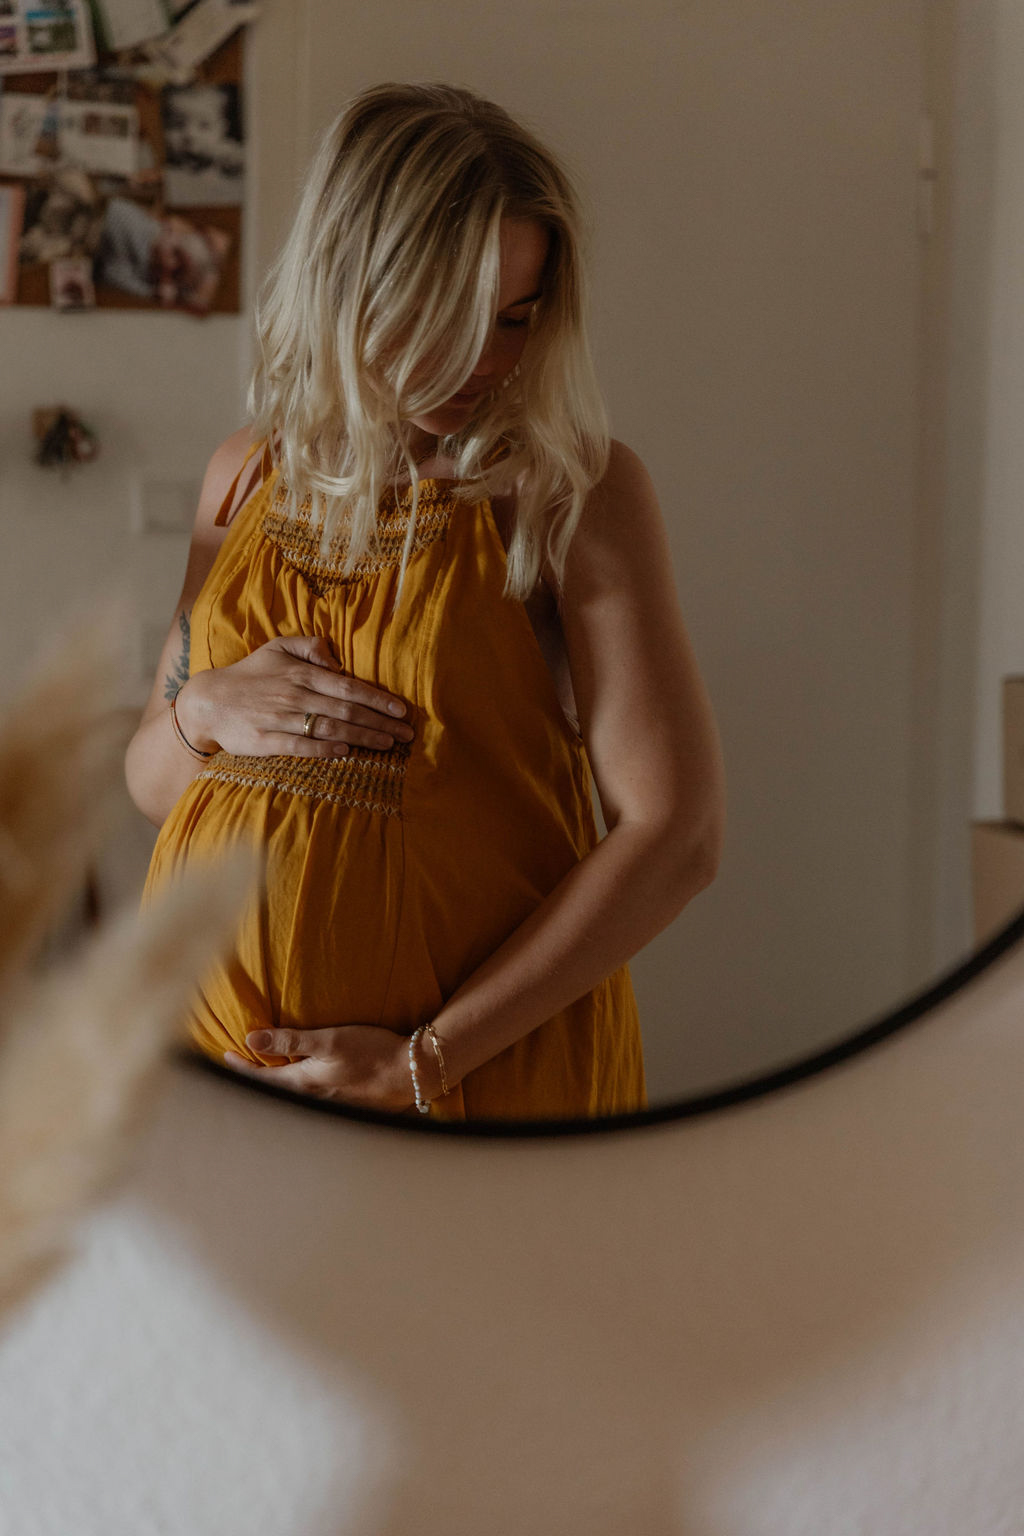 pregnant woman photographed in a mirror holding her belly looking down to the side